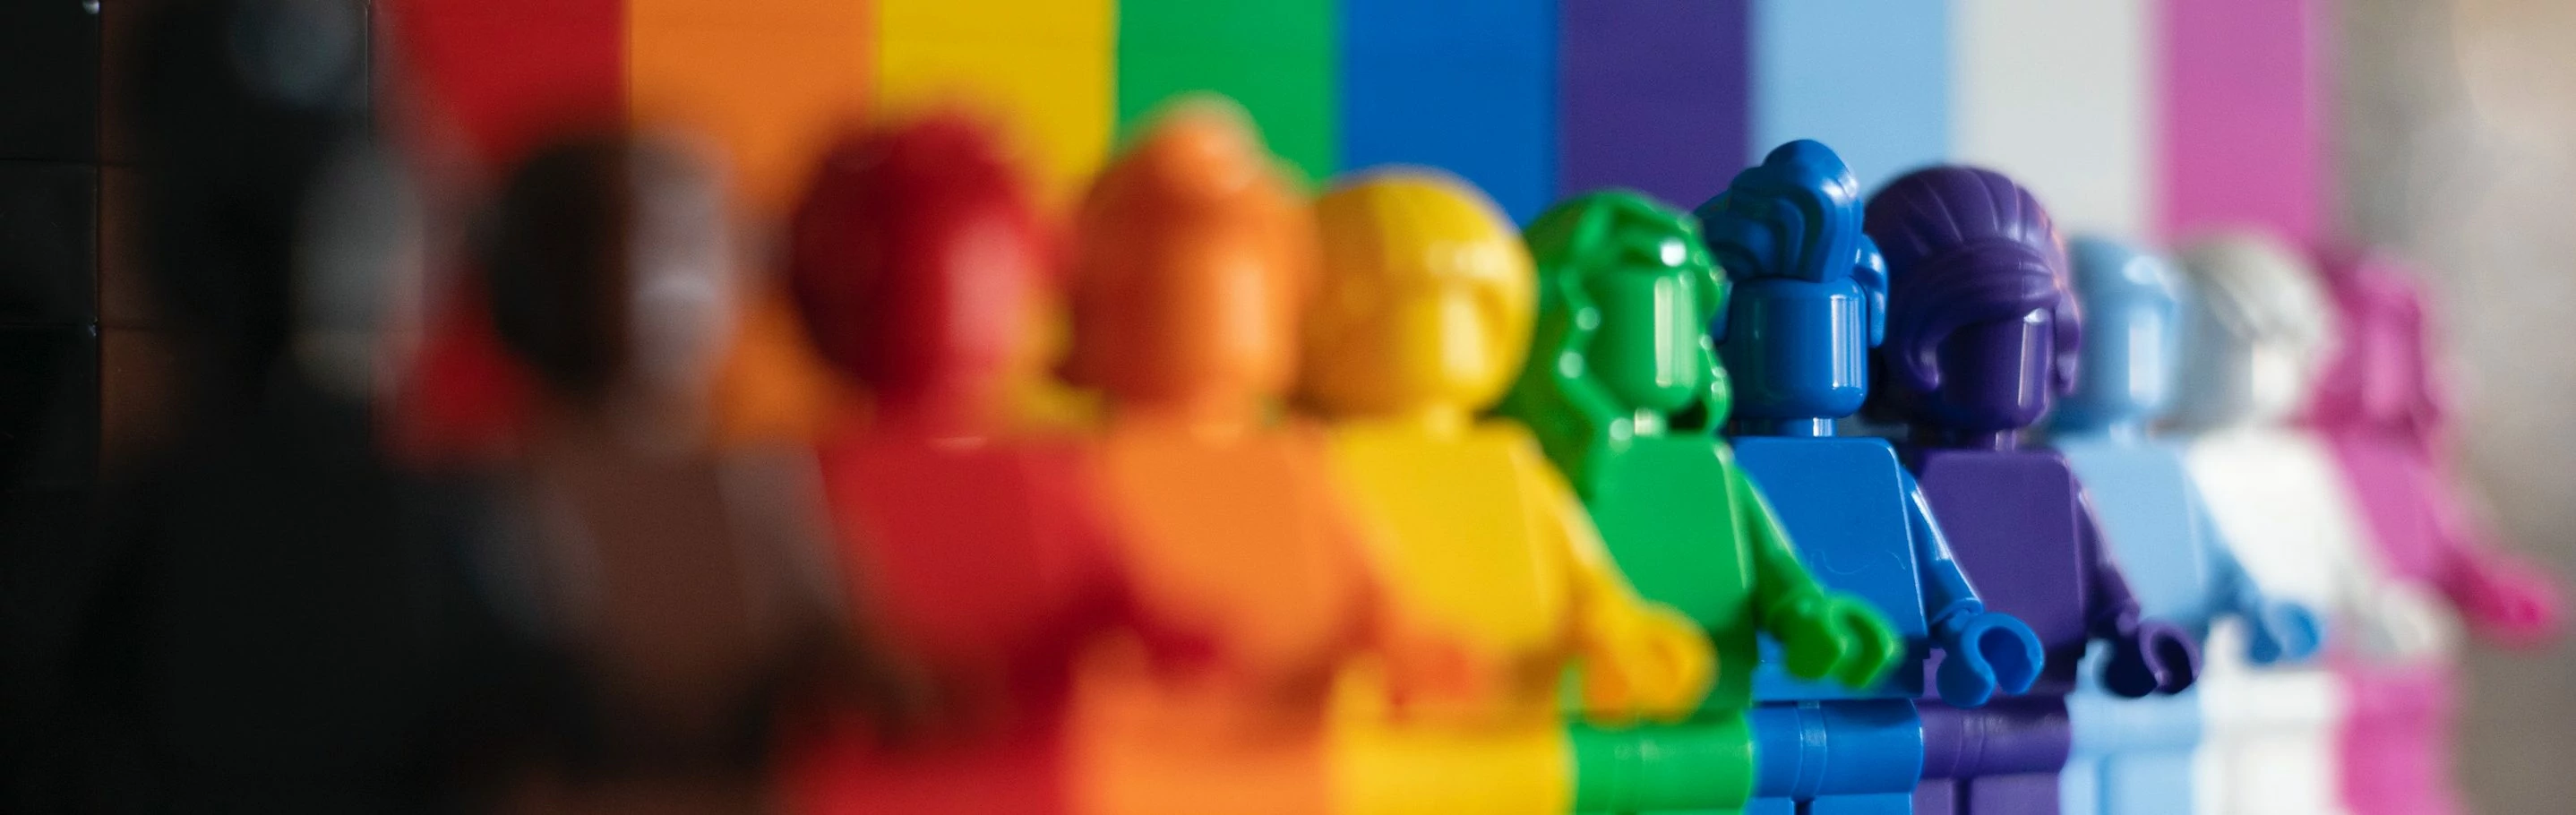 A range of Lego figures in different colors